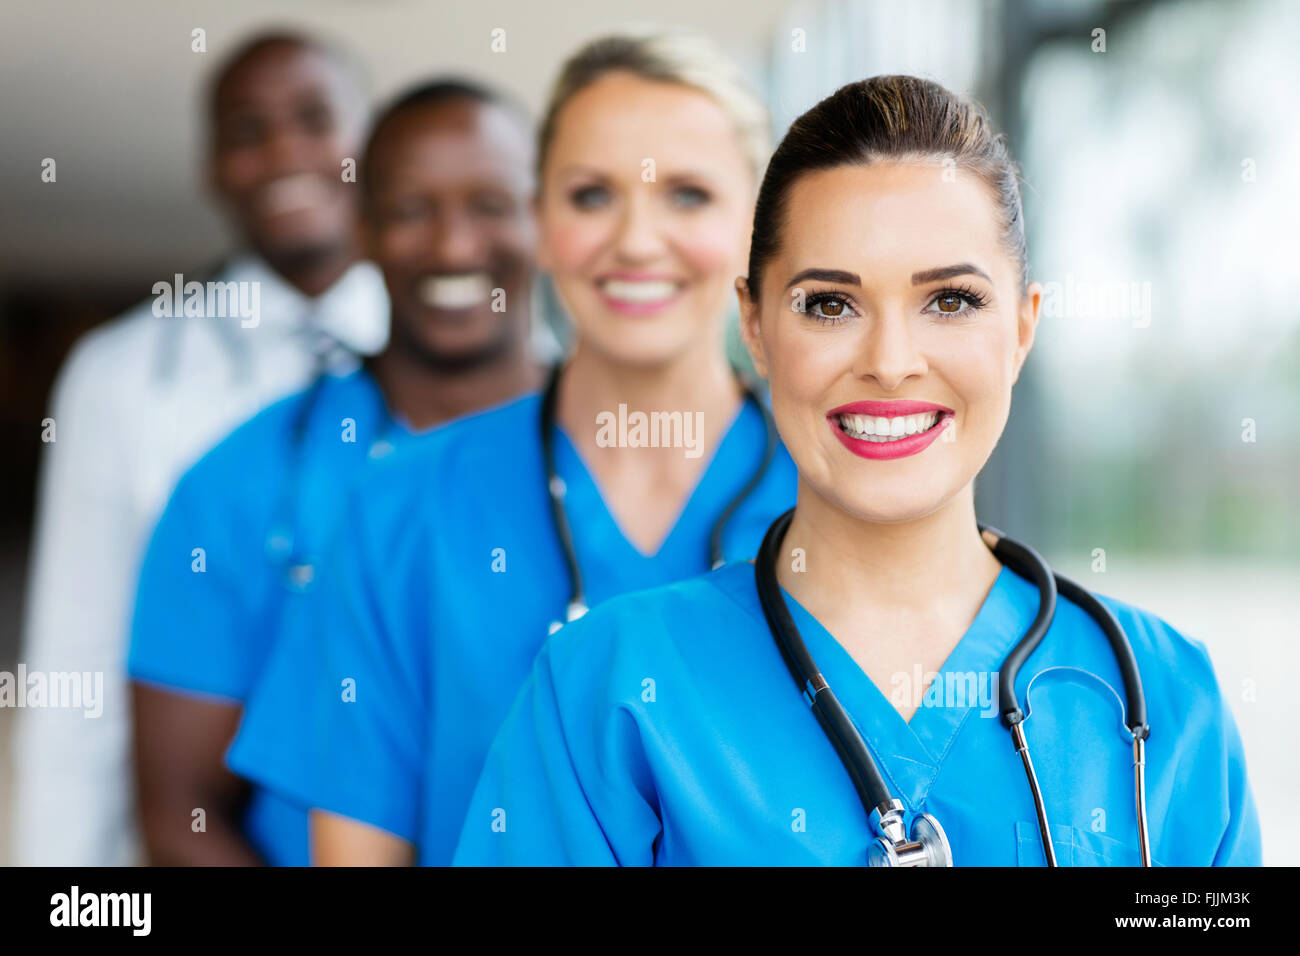 group of modern medical professionals in hospital Stock Photo